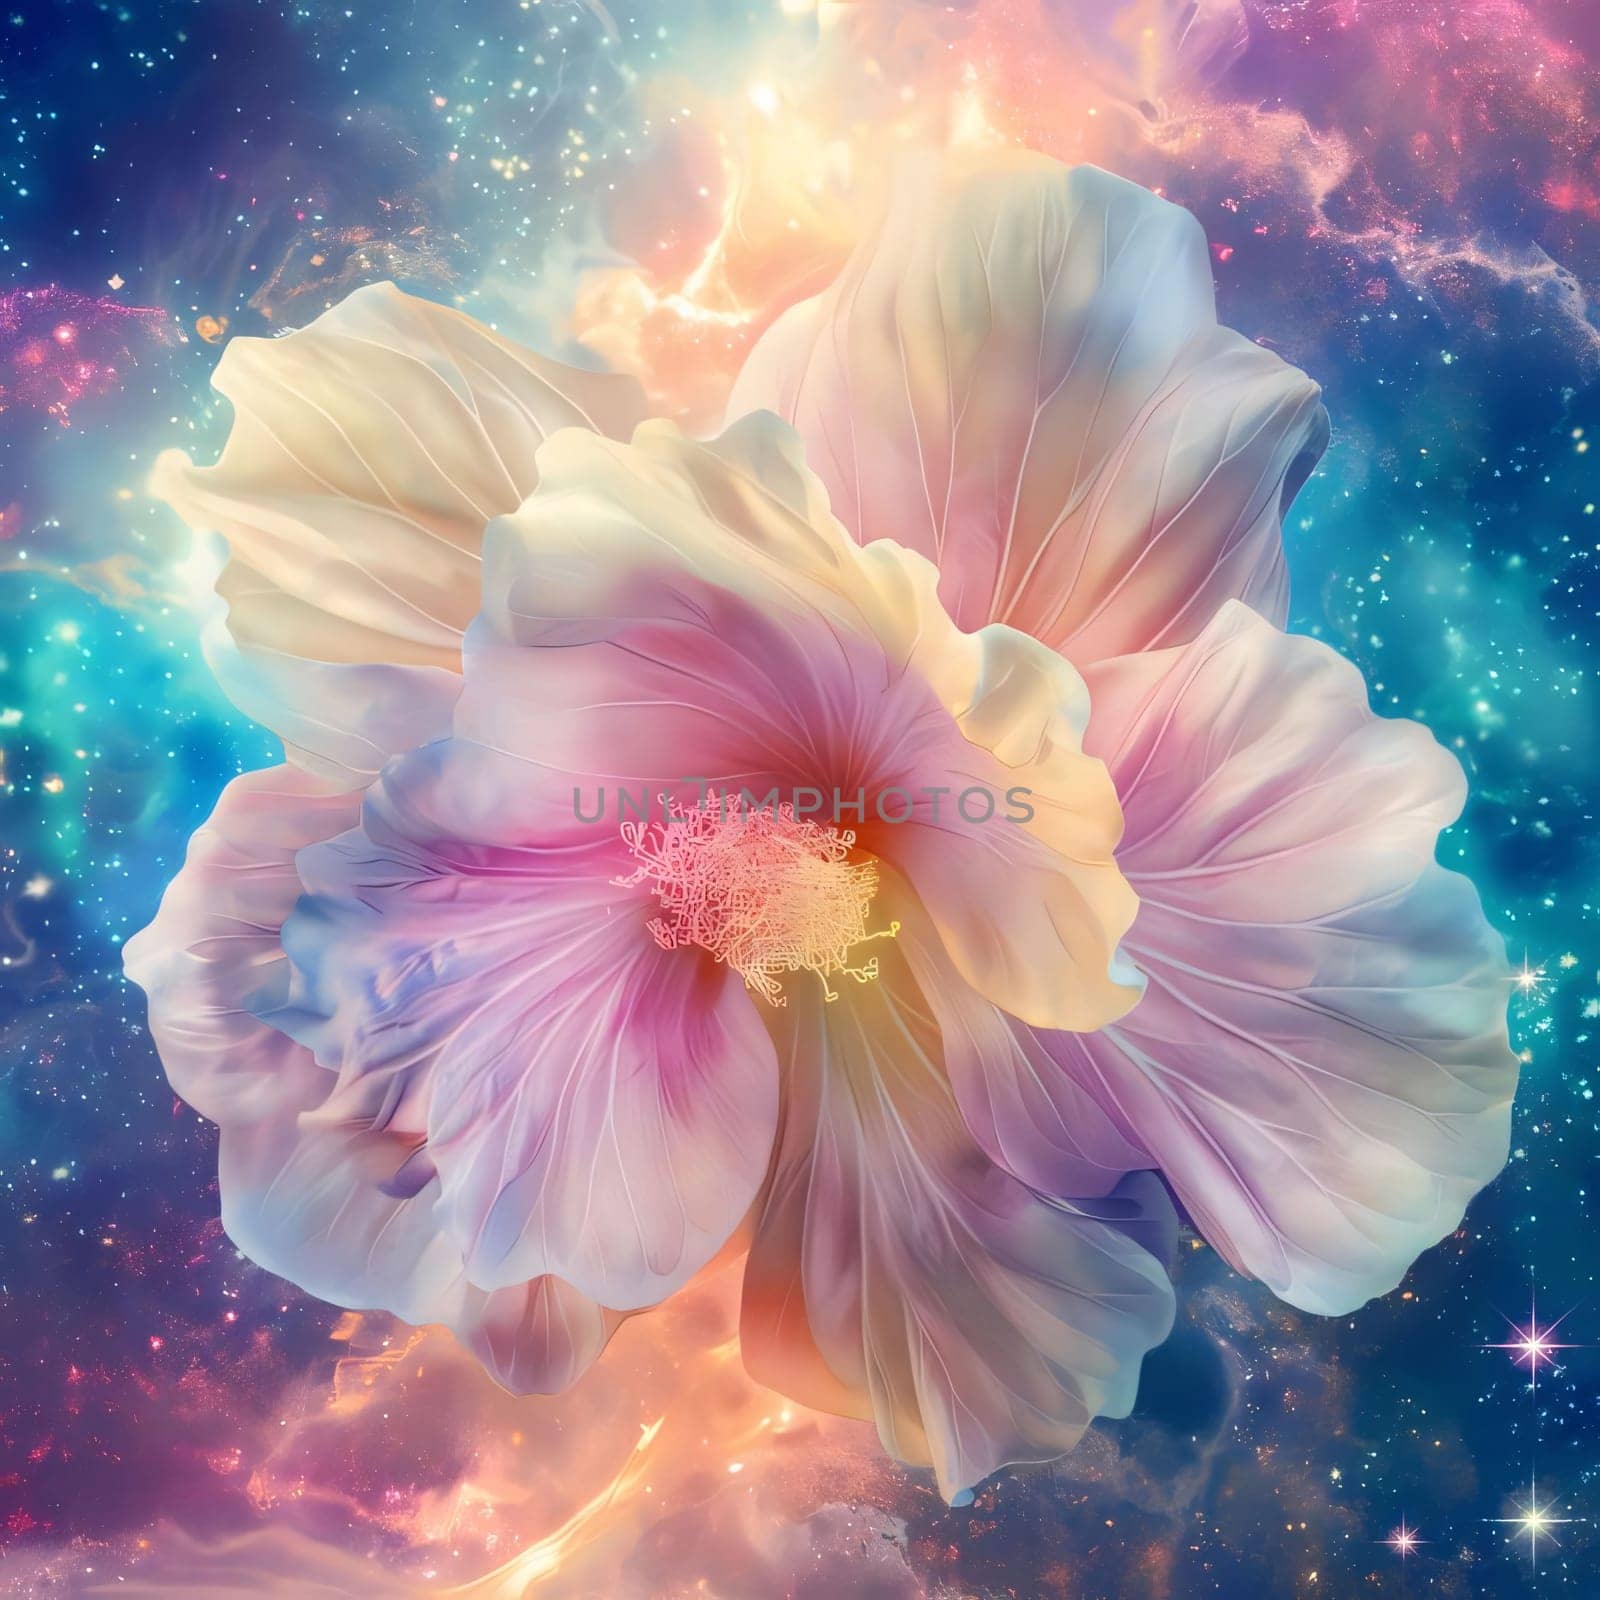 Abstract light blue colorful flower on a starry background. Flowering flowers, a symbol of spring, new life. A joyful time of nature awakening to life.